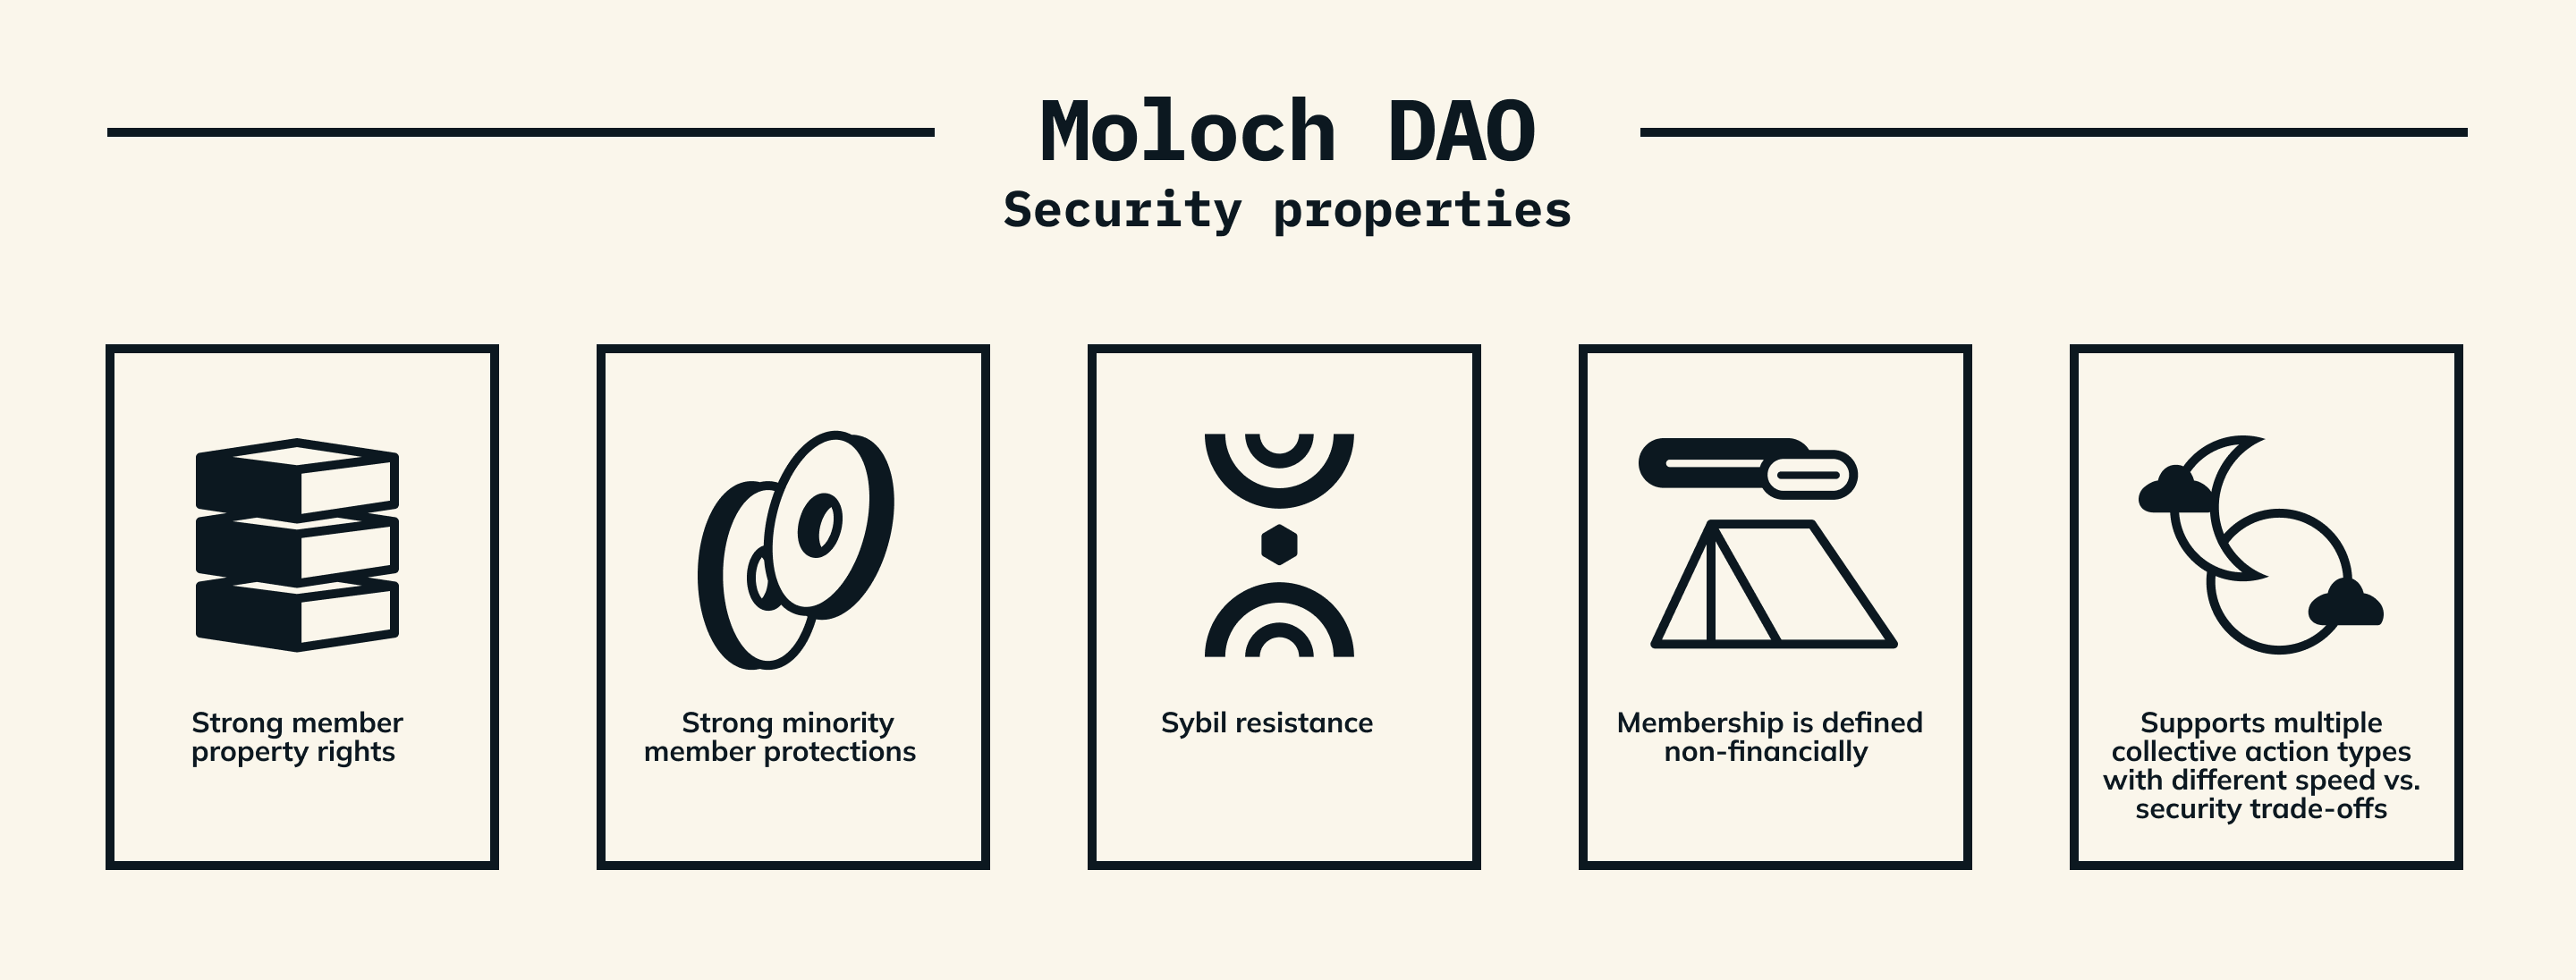 Moloch DAOs are highly secure